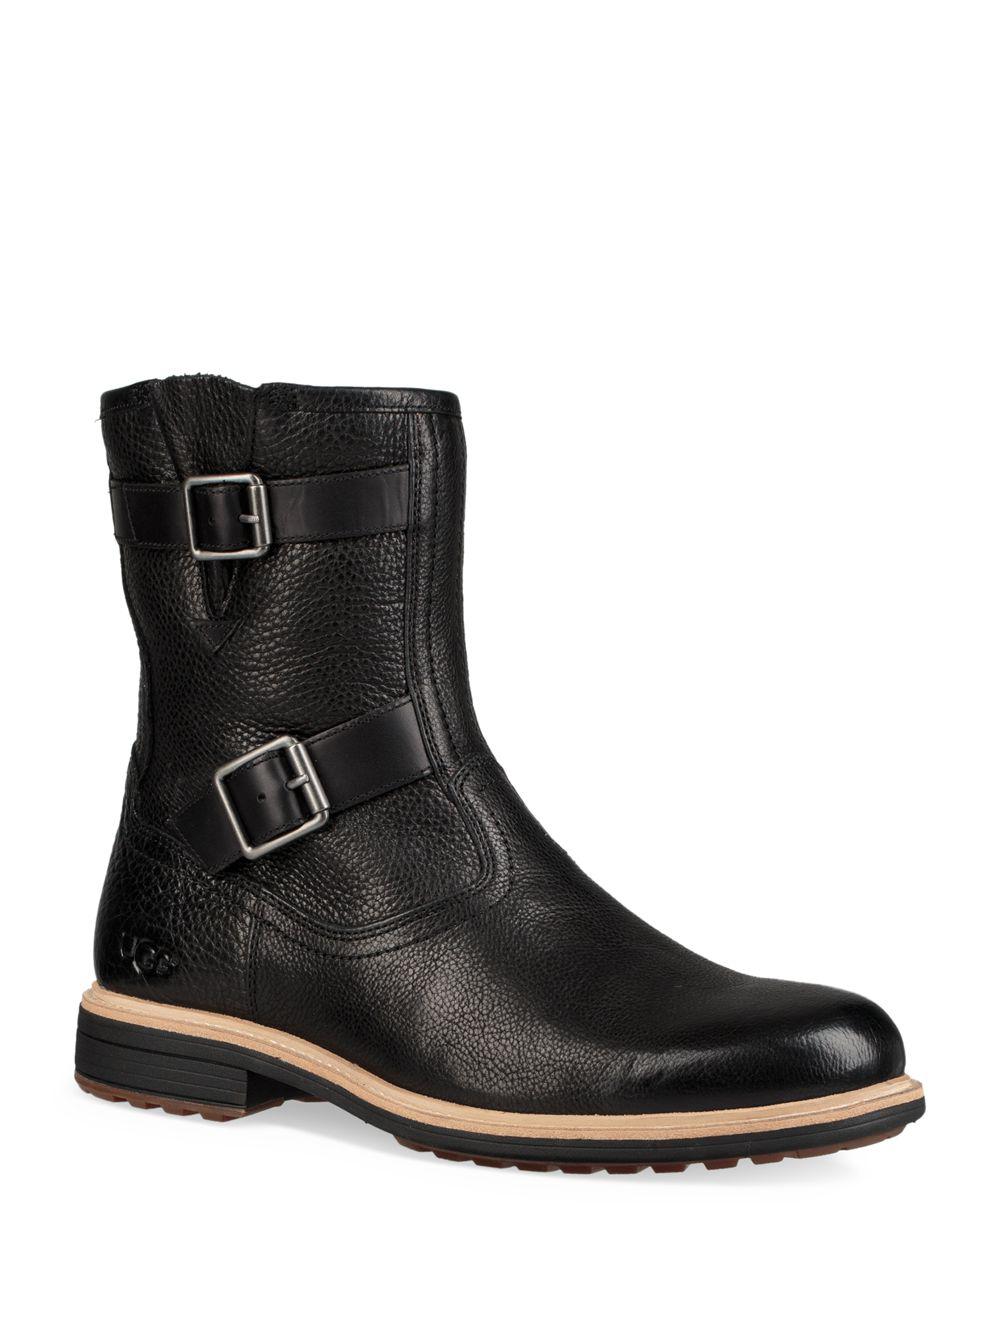 UGG Motorcycle Leather & Shearlinglined Boots in Black